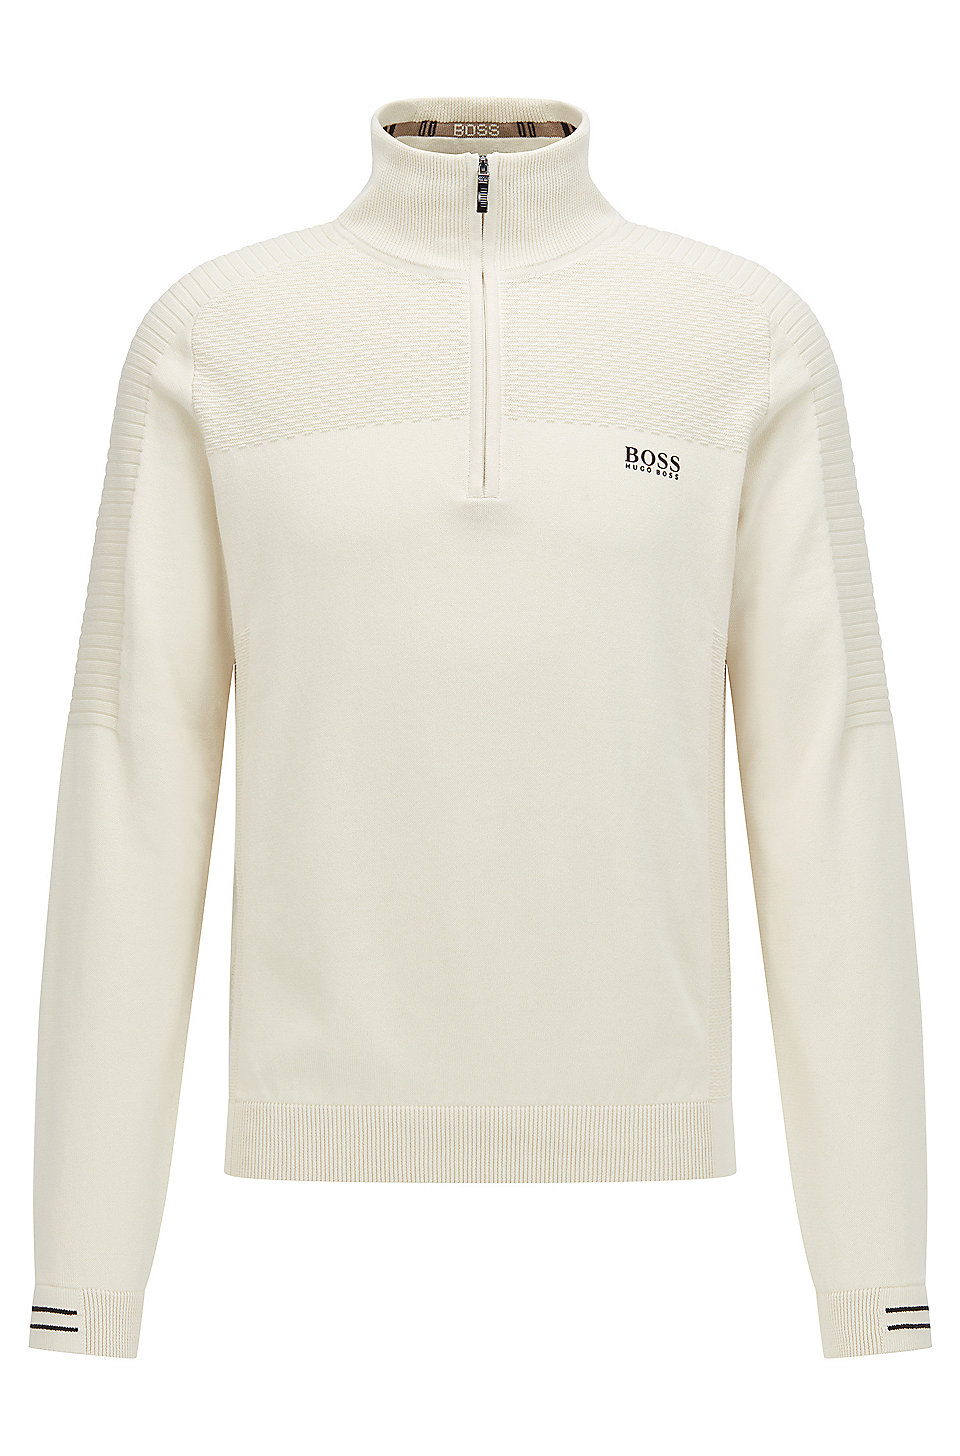 Hugo Boss Jumper - Craig Donnelly Golf | Golf Tuition in & Angus